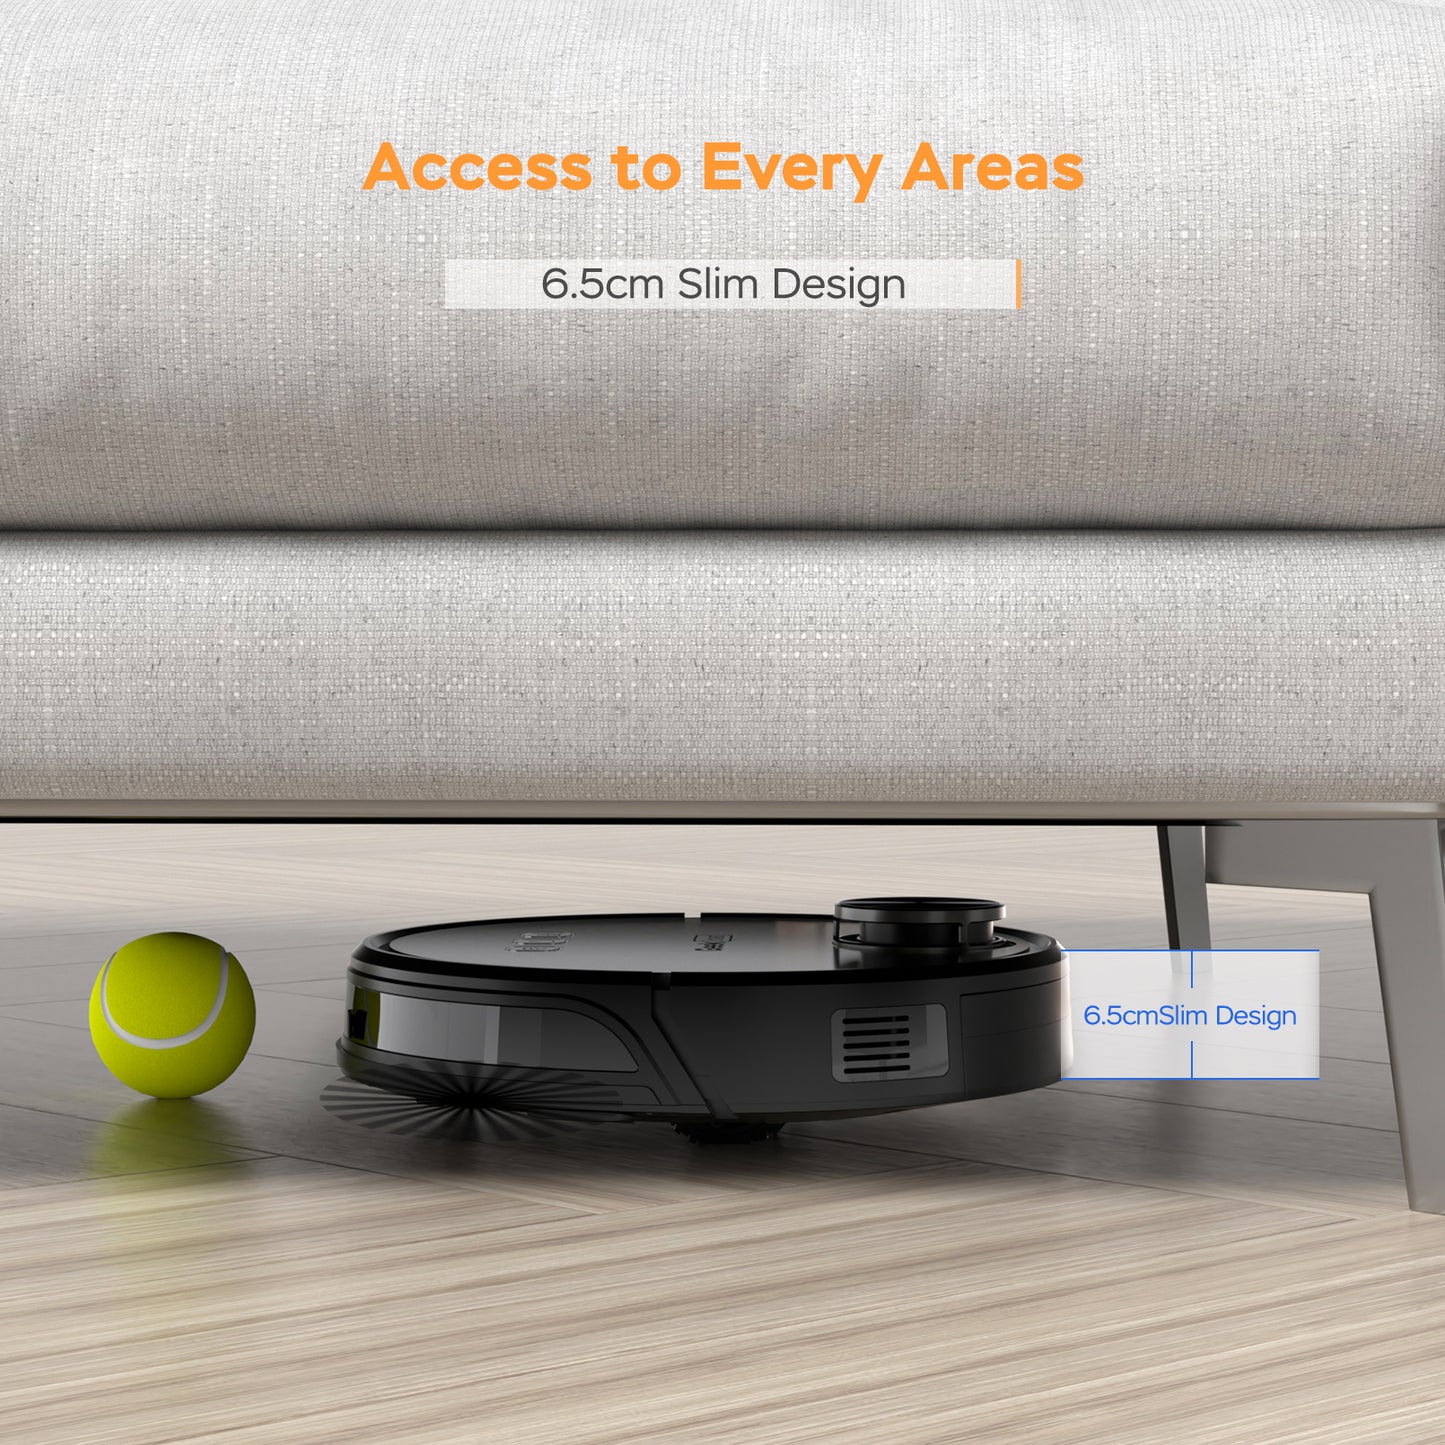 Geek Smart L8 Robot Vacuum Cleaner and Mop, LDS Navigation, Wi-Fi Connected APP, Selective Room Cleaning,MAX 2700 PA Suction, Ideal for Pets and Larger Home